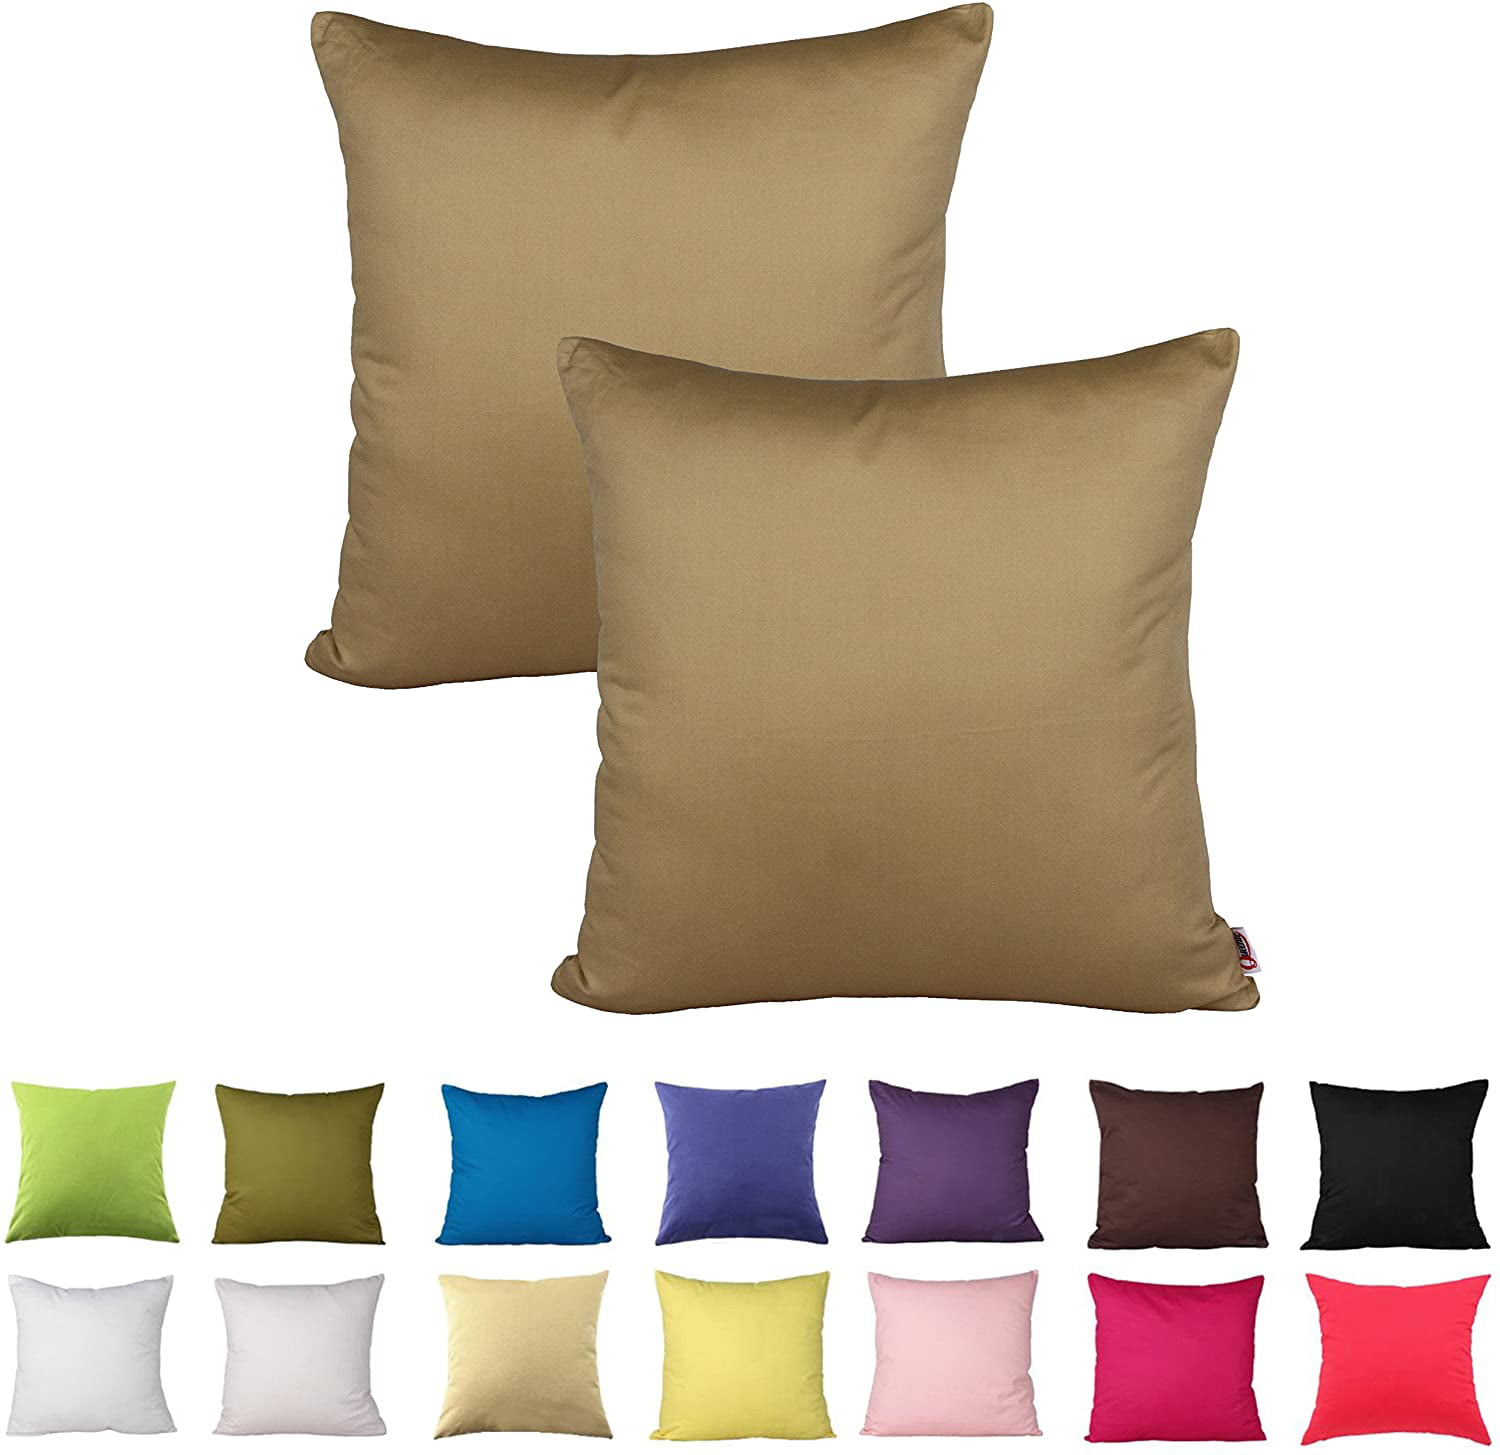 Cushion Cover Pillow Case Decorative Cushion Pillow 40x40 in 13 Sizes 100% Cotton 